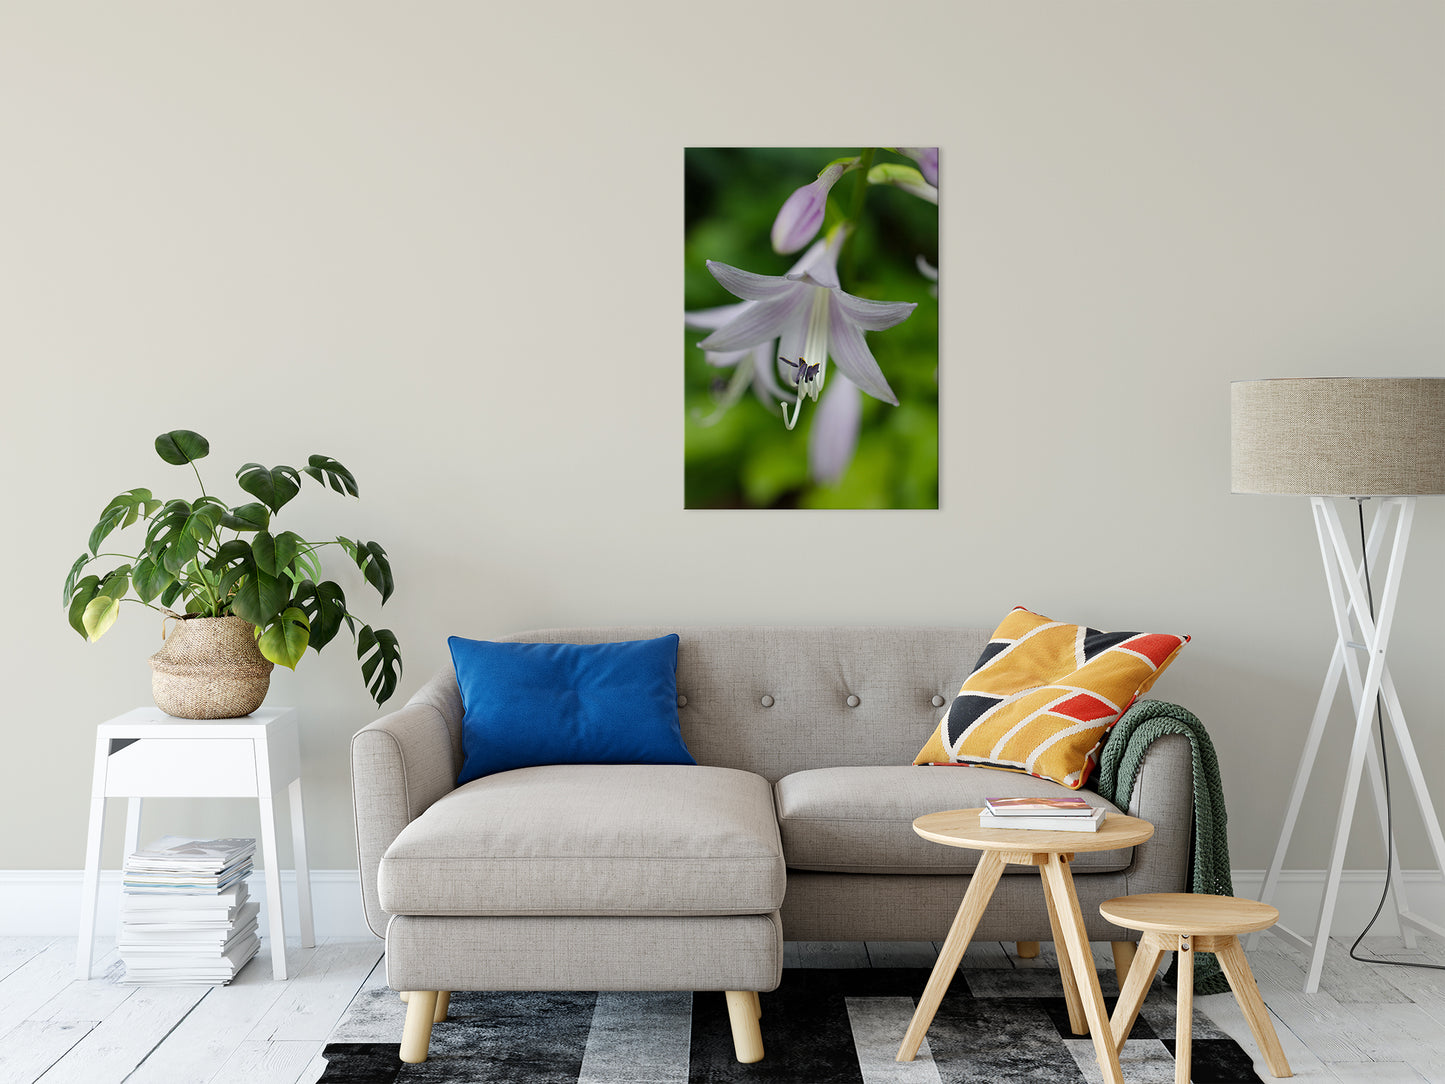 Hosta Bloom Nature / Floral Photo Fine Art Canvas Wall Art Prints 24" x 36" - PIPAFINEART